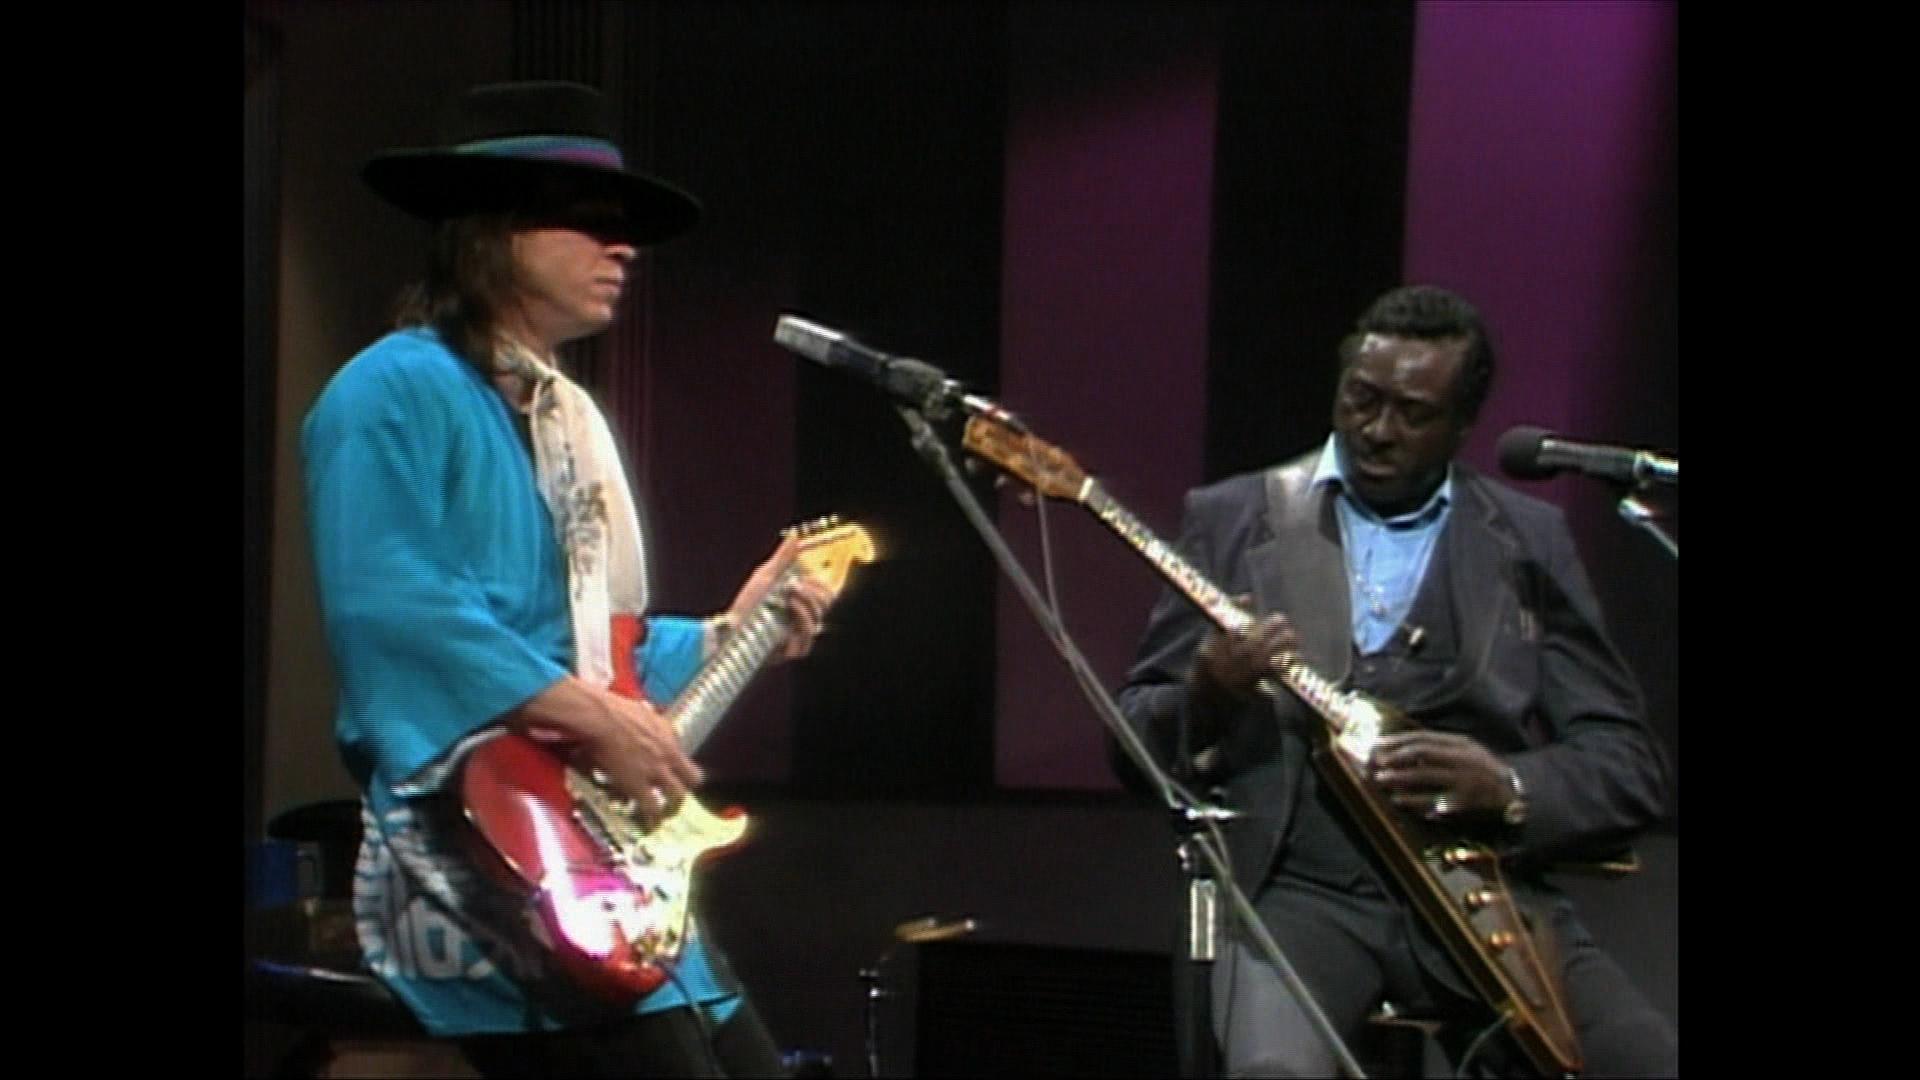 Video ALBERT KING with STEVIE RAY VAUGHN IN SESSION Watch KSPS